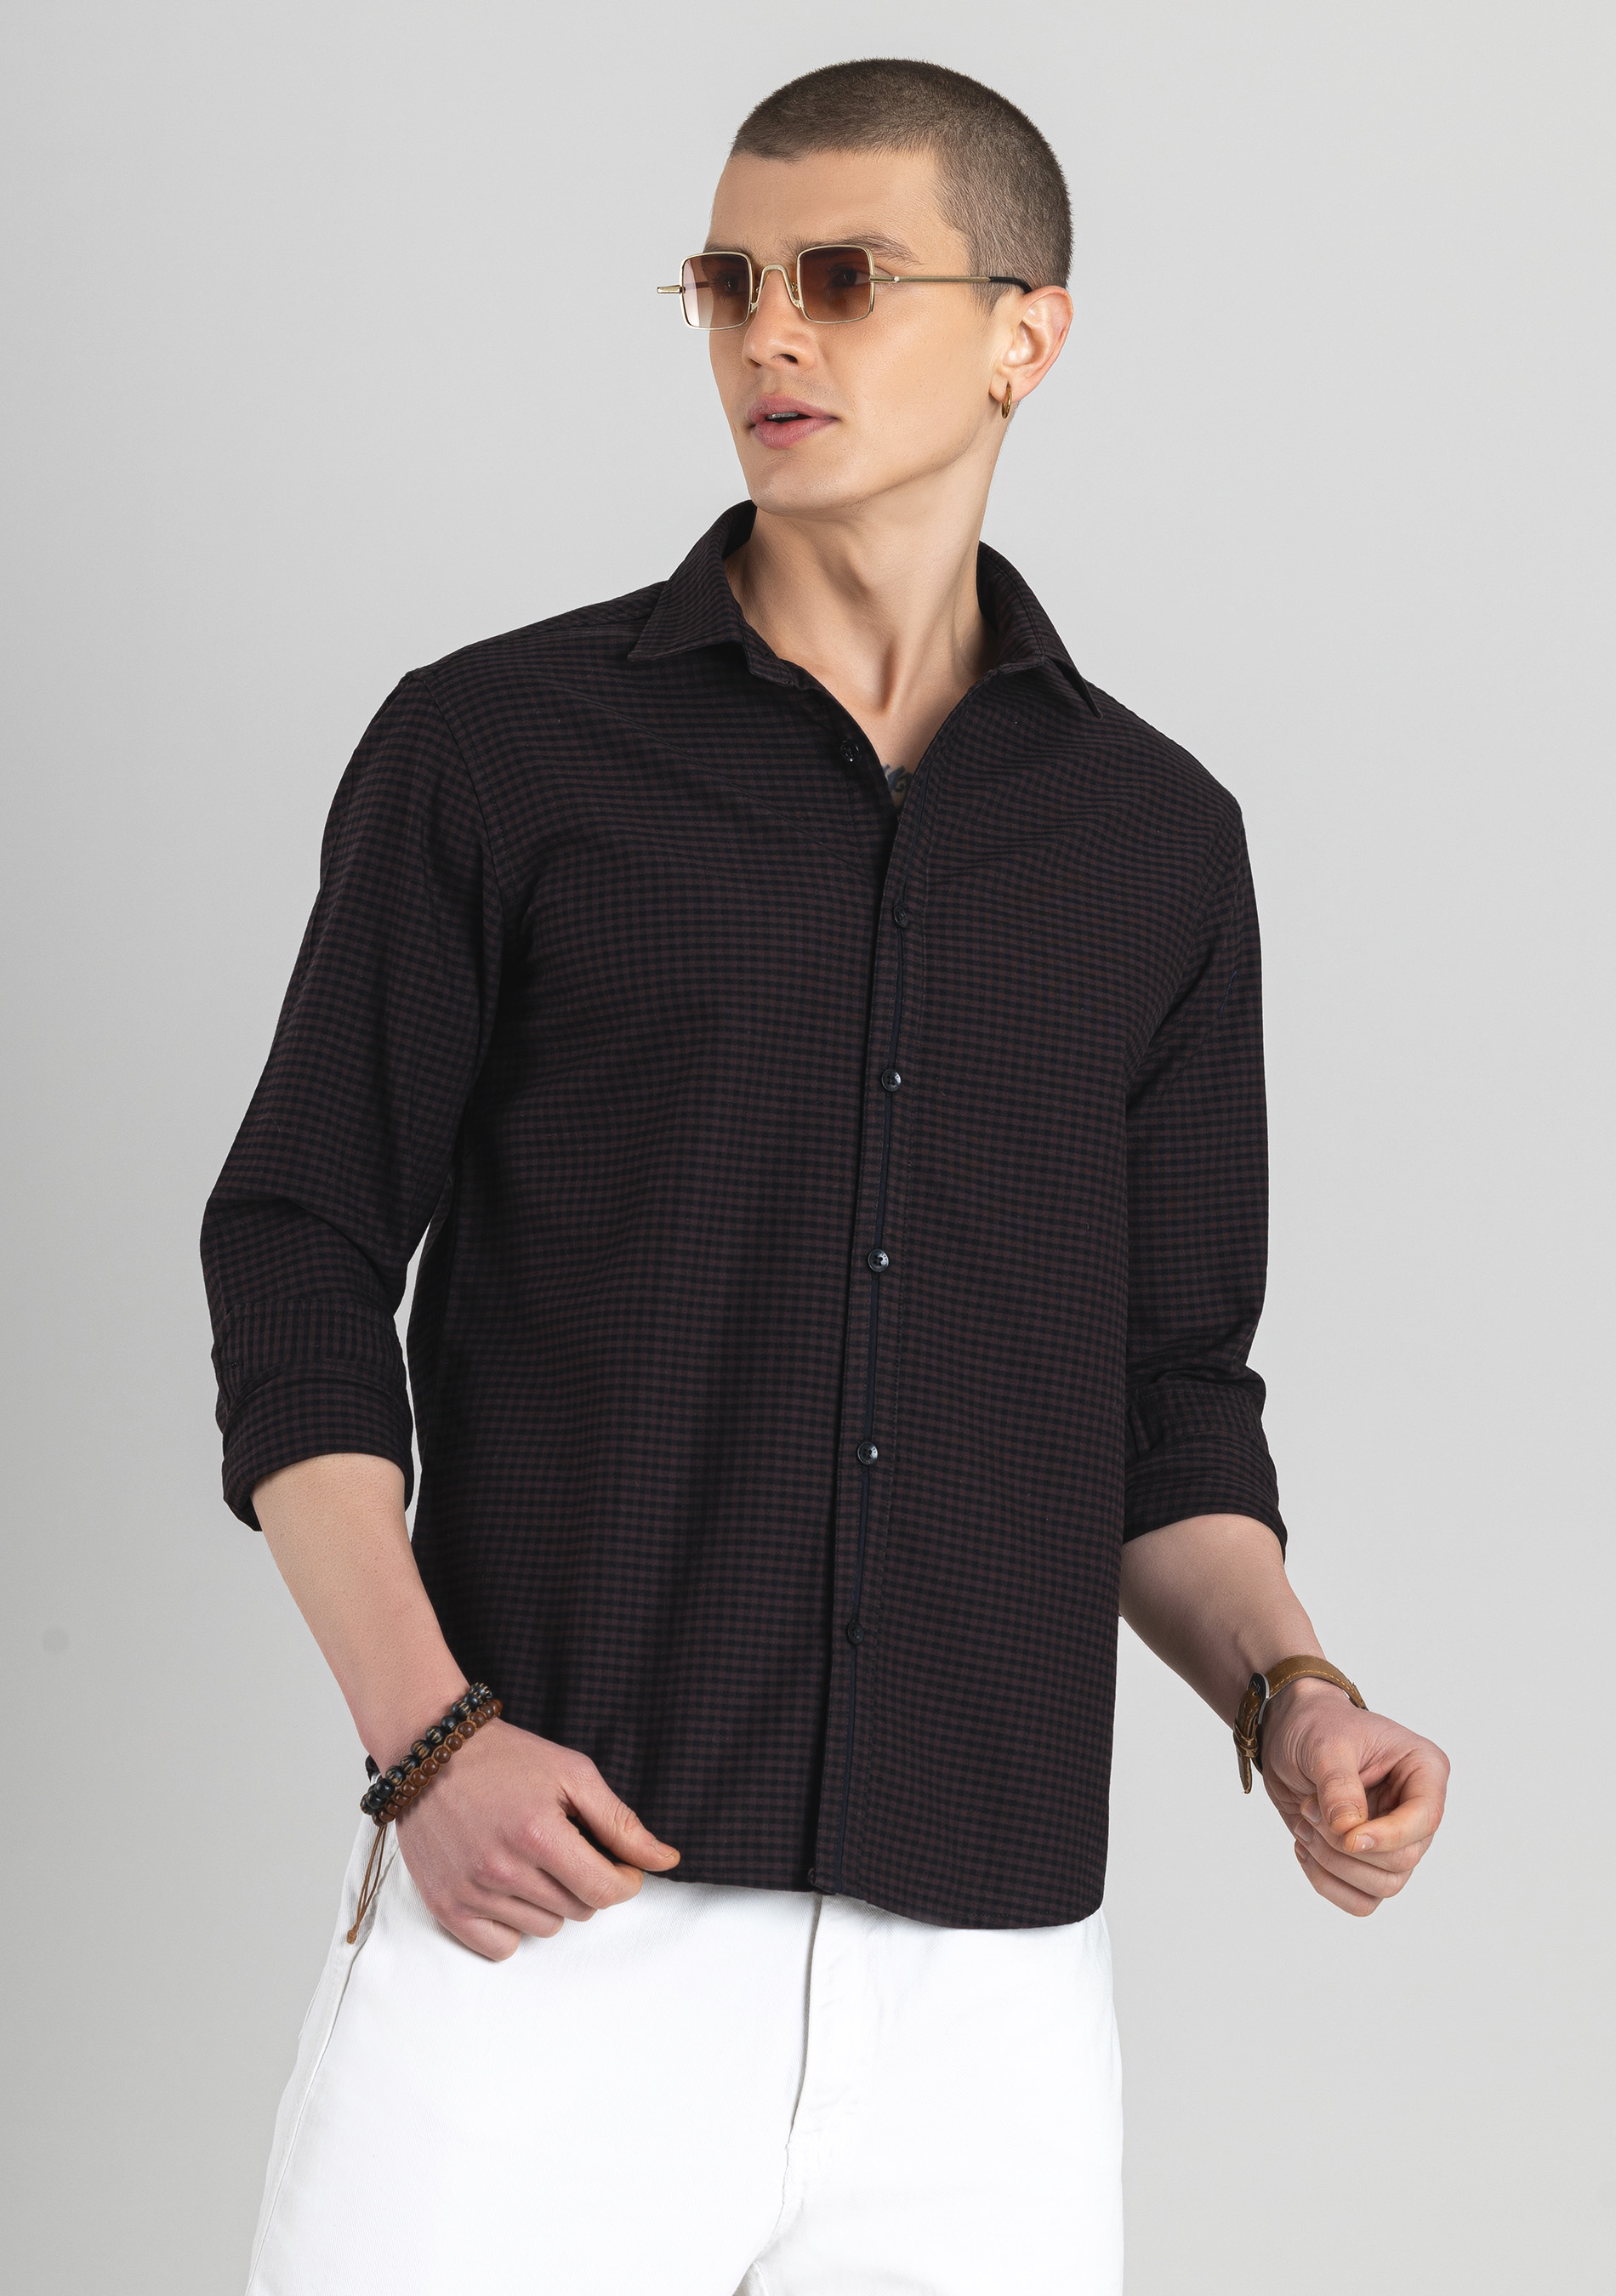 Chocolate Brown And Black Gingham Men's Cotton Check Shirt - Buy Online ...